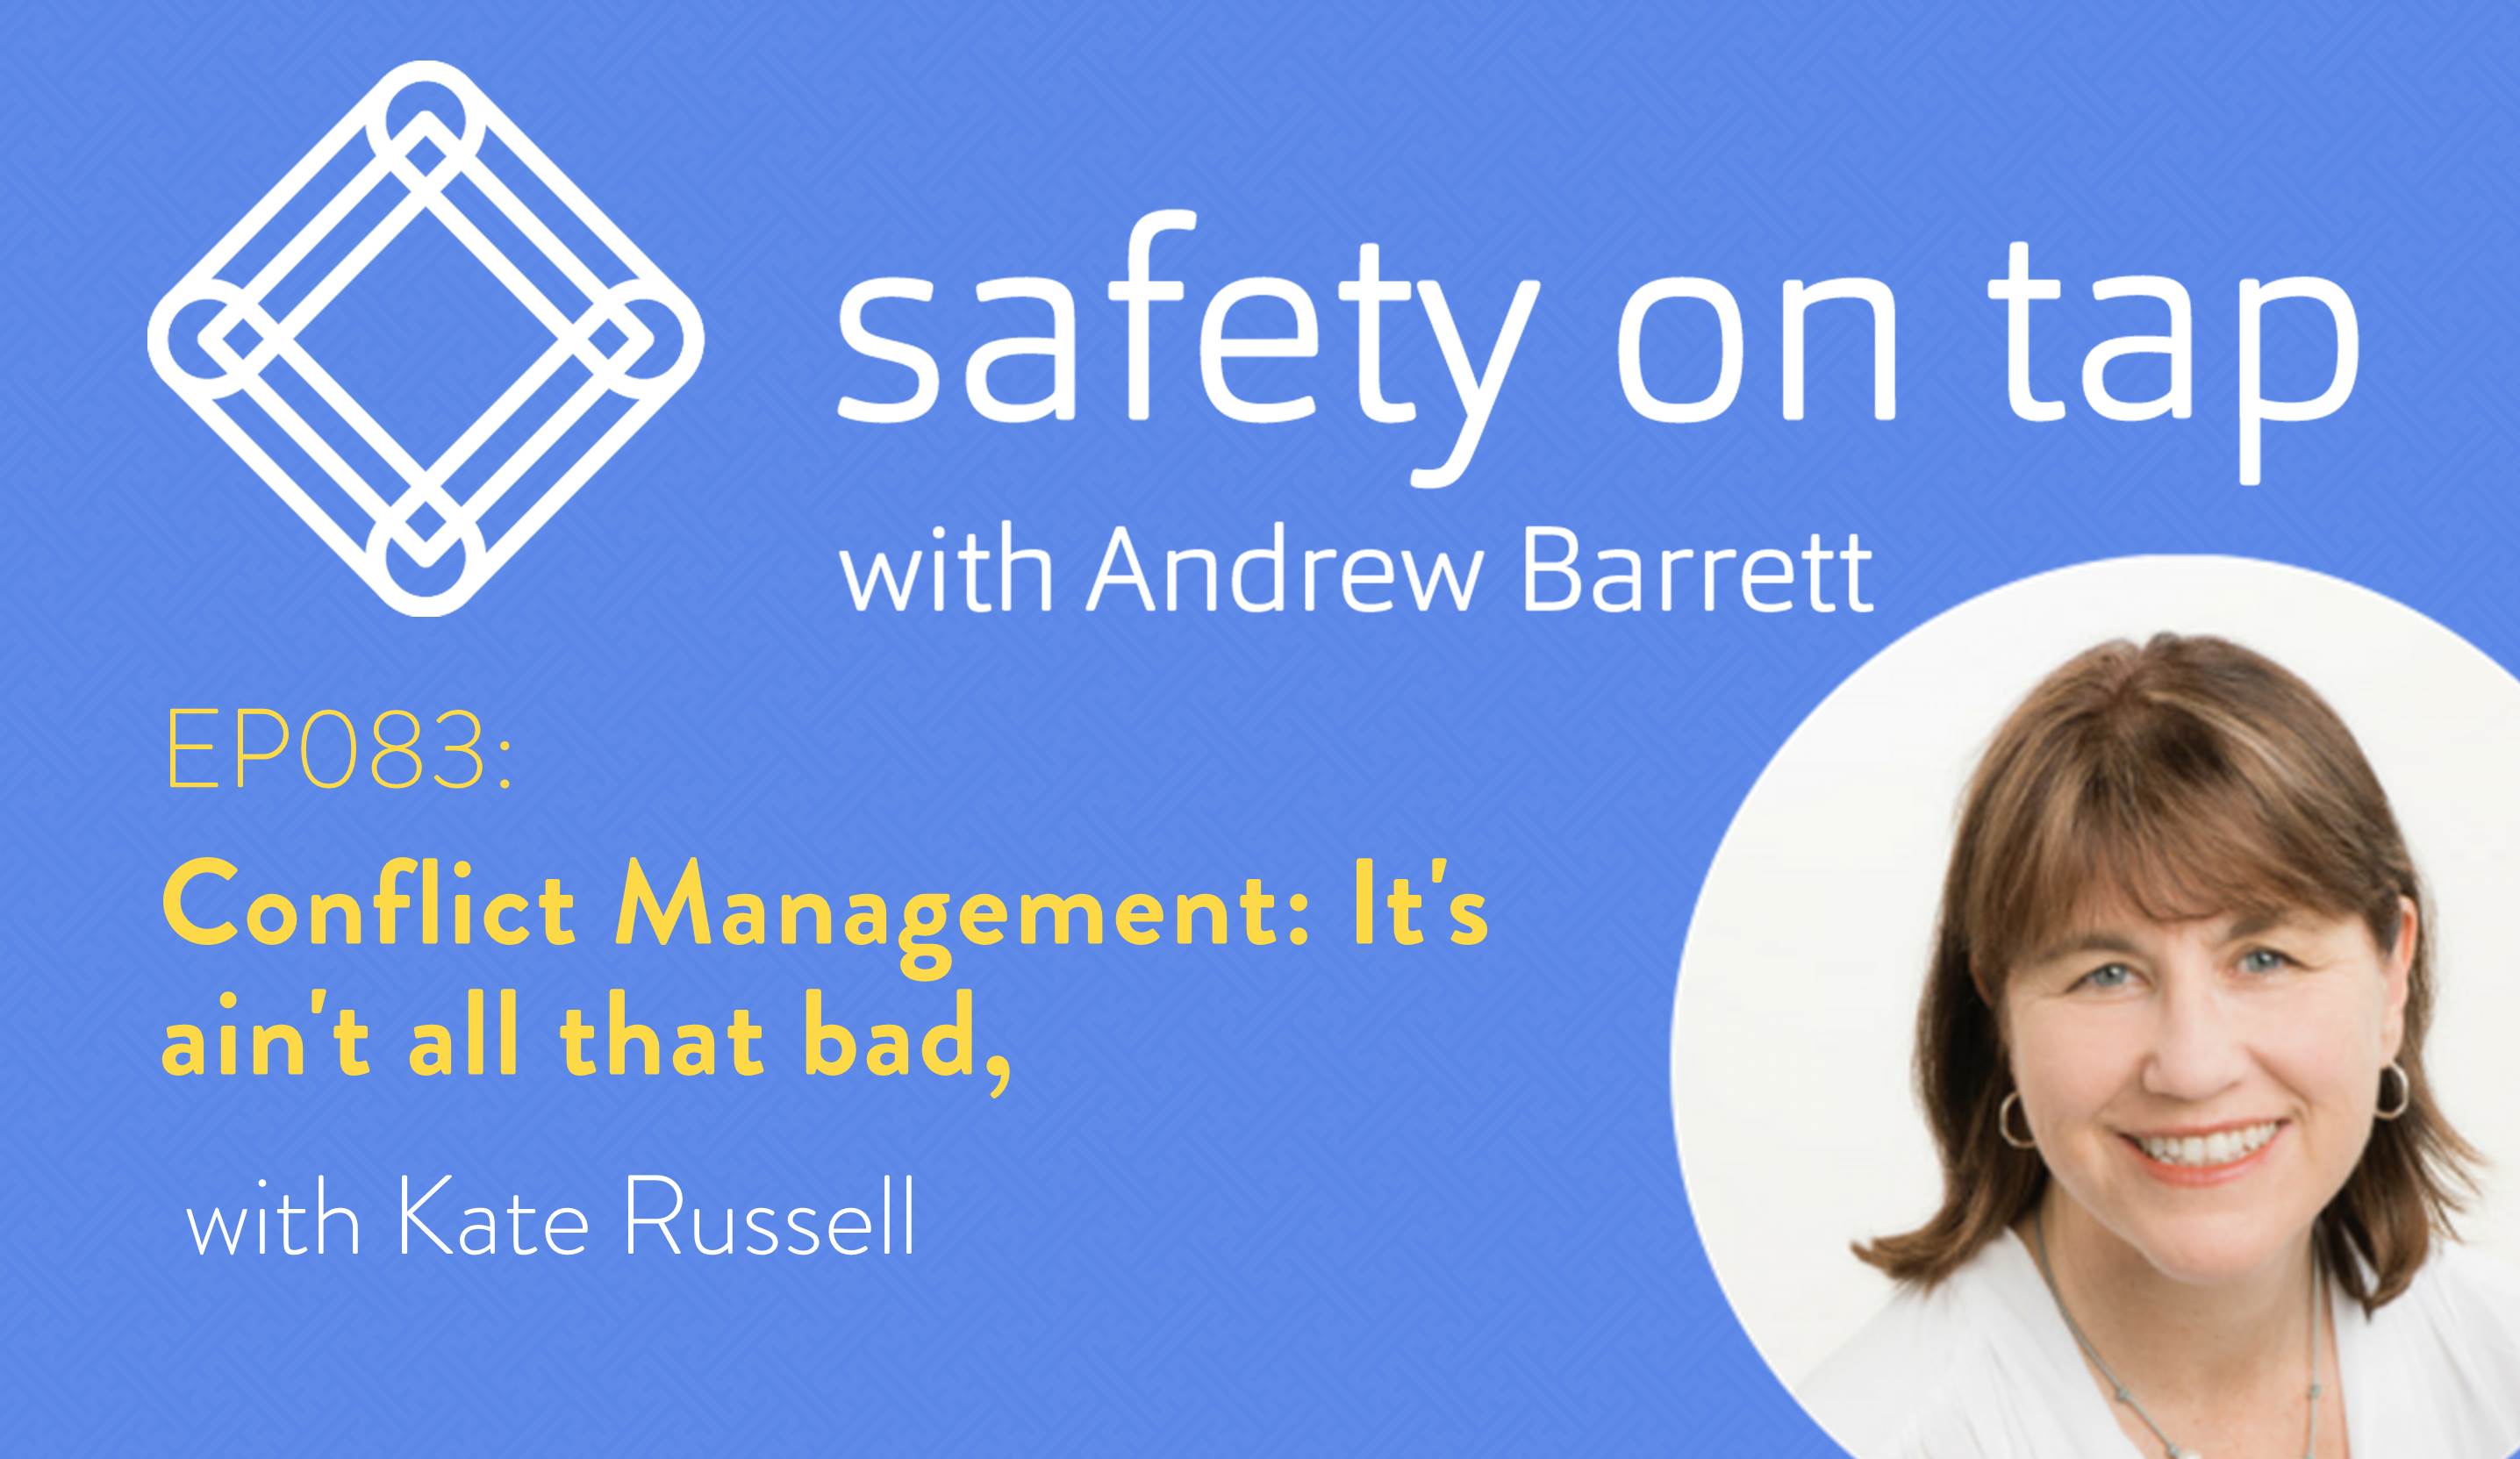 Ep083: Conflict Management: It’s ain’t all that bad, with Kate Russell